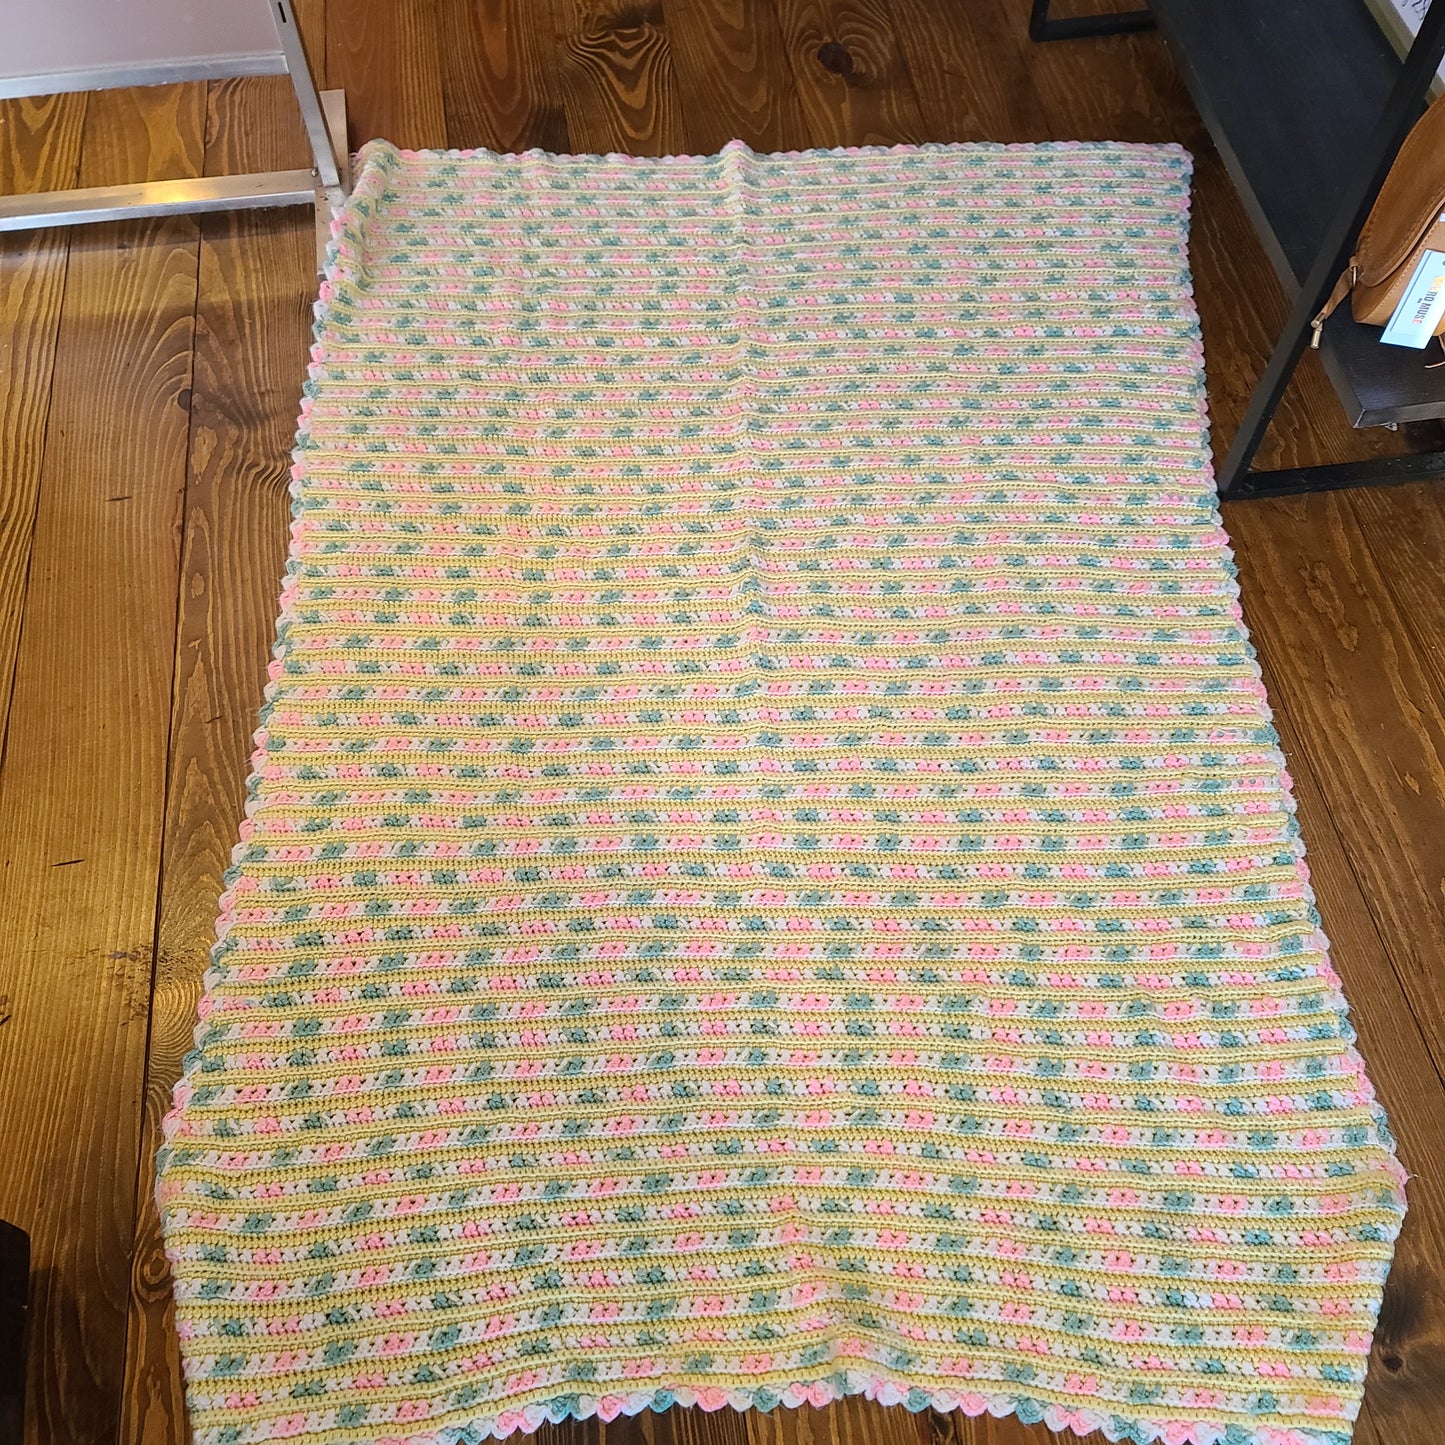 Yellow Striped Crocheted Quilt (54x64)